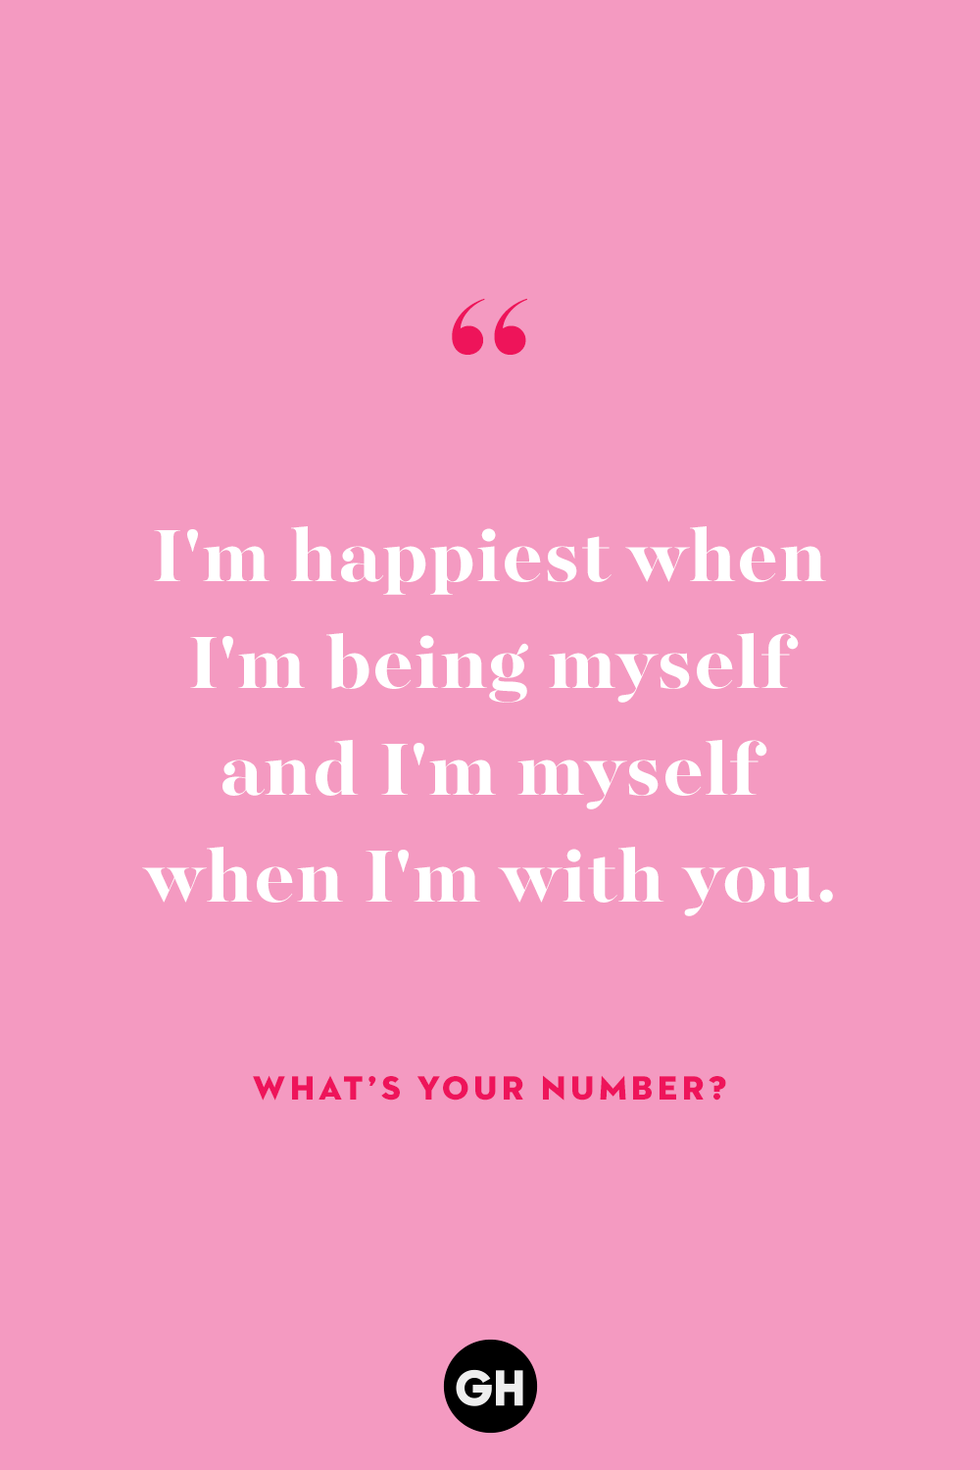 LOVE QUOTES – Call me cupid